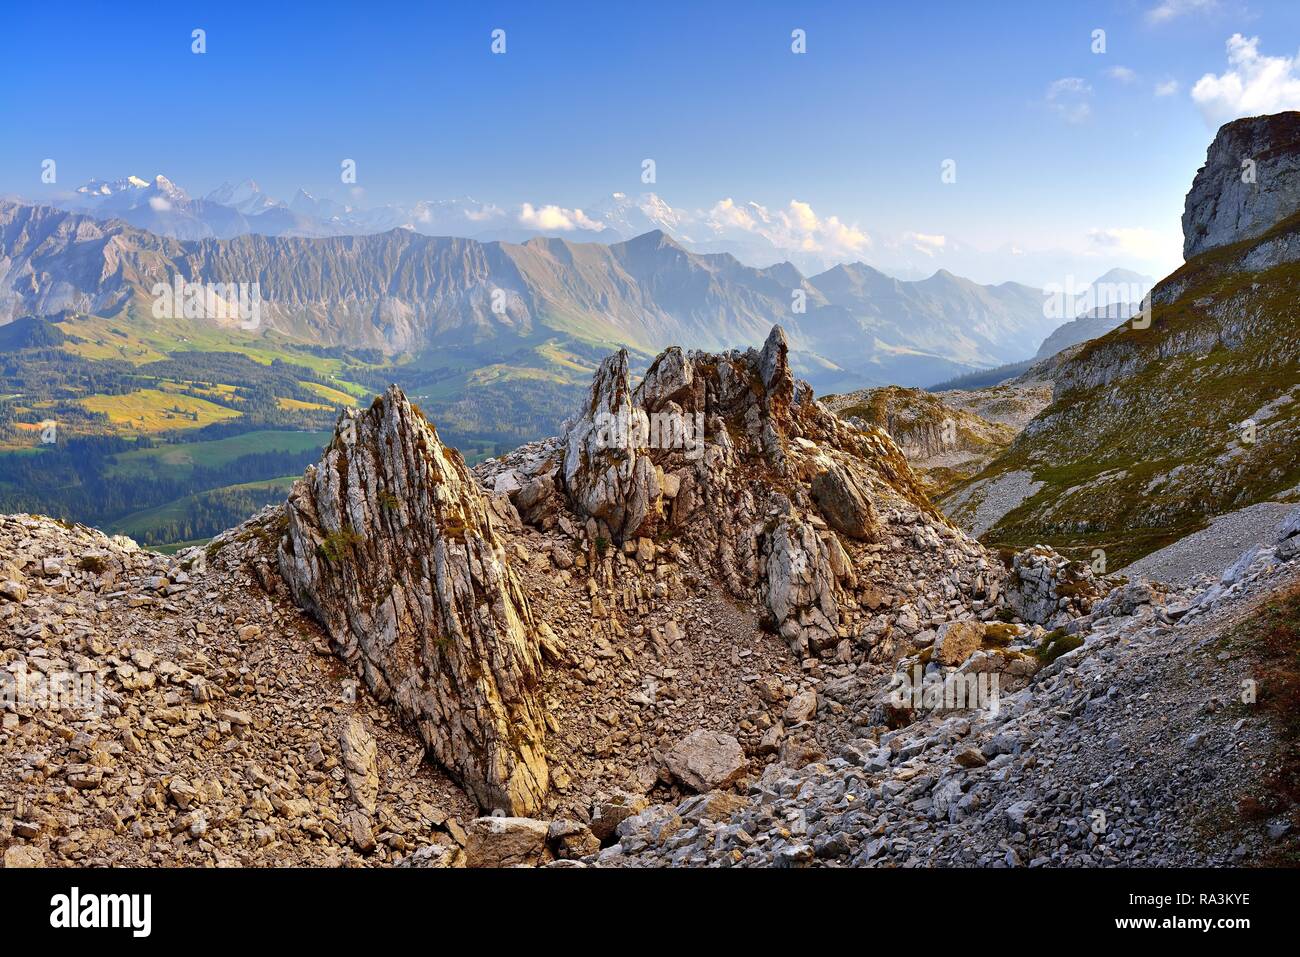 Evening light in the karst area of Schrattenfluh, Unesco Biosphere Entlebuch, view of the Lucerne and Bernese Alps Stock Photo